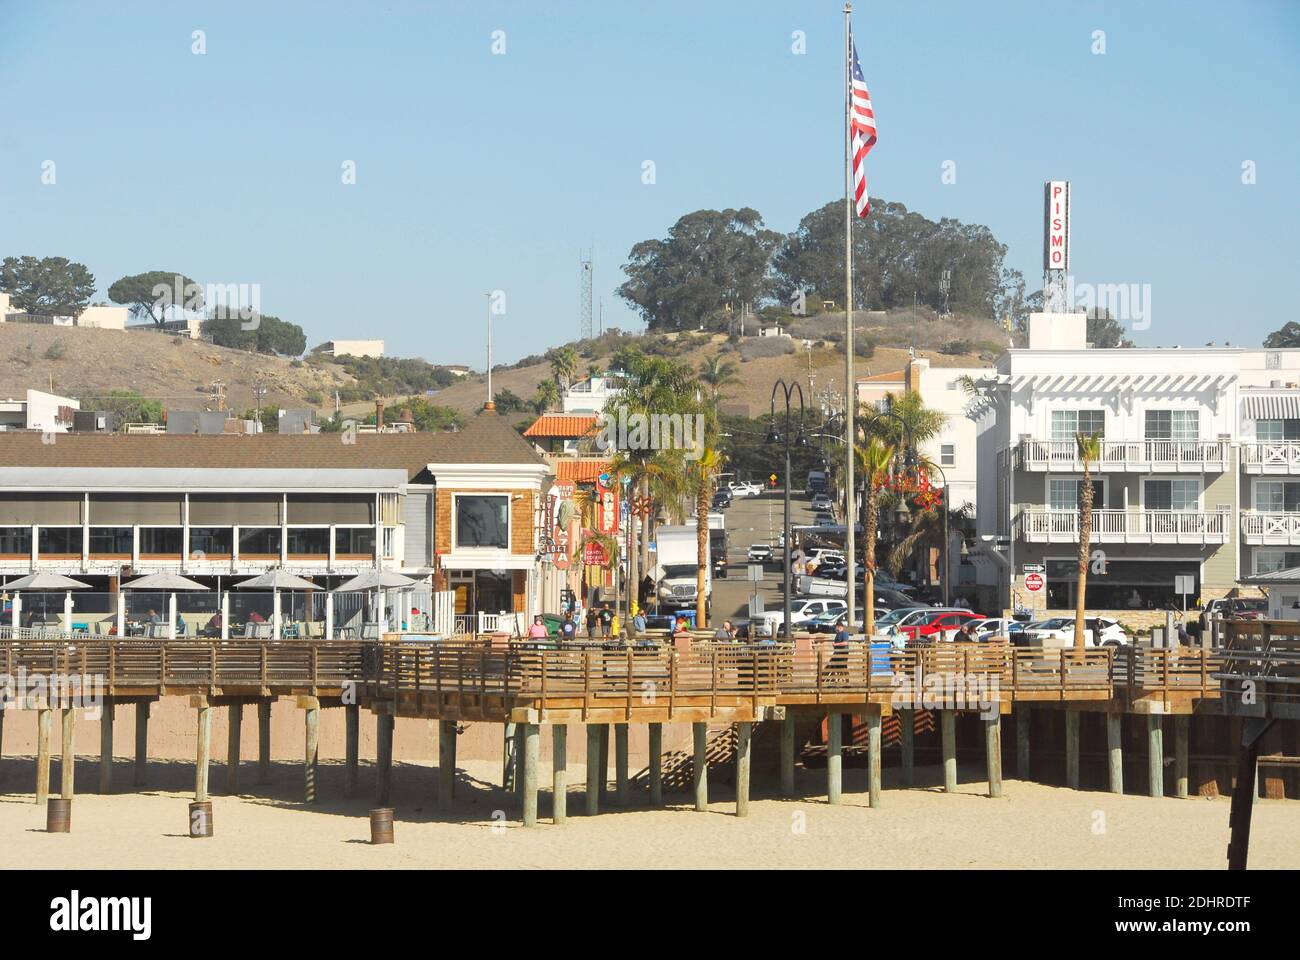 View of the town from the pier of Pismo Beach in San Luis Obispo County, California, famous for its Pismo Clams, beaches, and sand dunes. Stock Photo